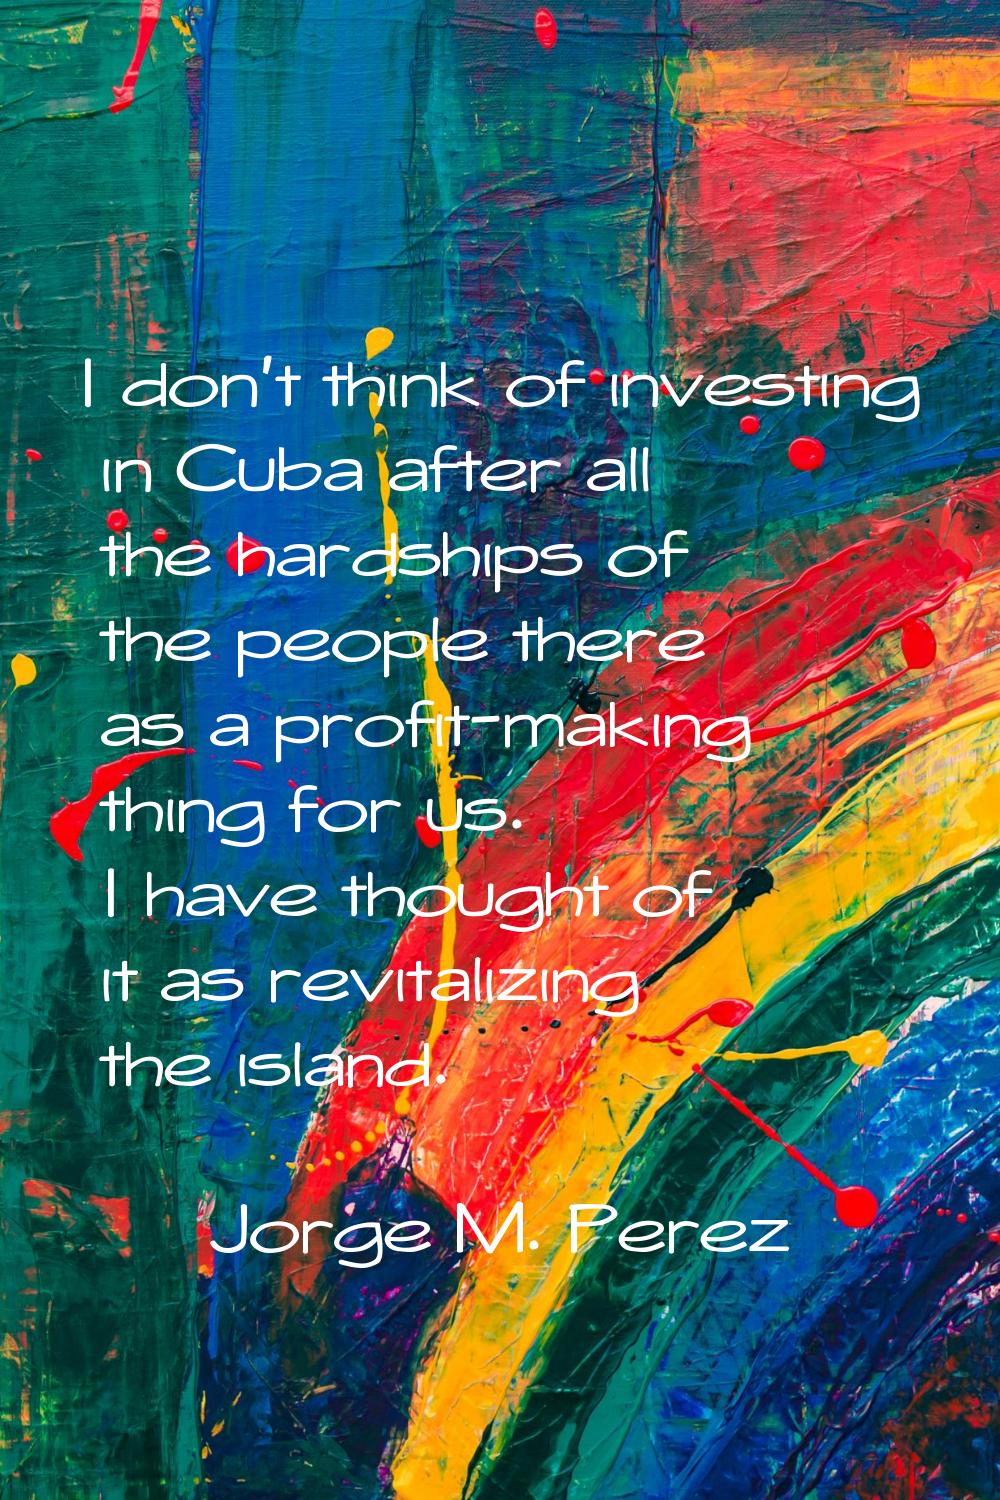 I don't think of investing in Cuba after all the hardships of the people there as a profit-making t